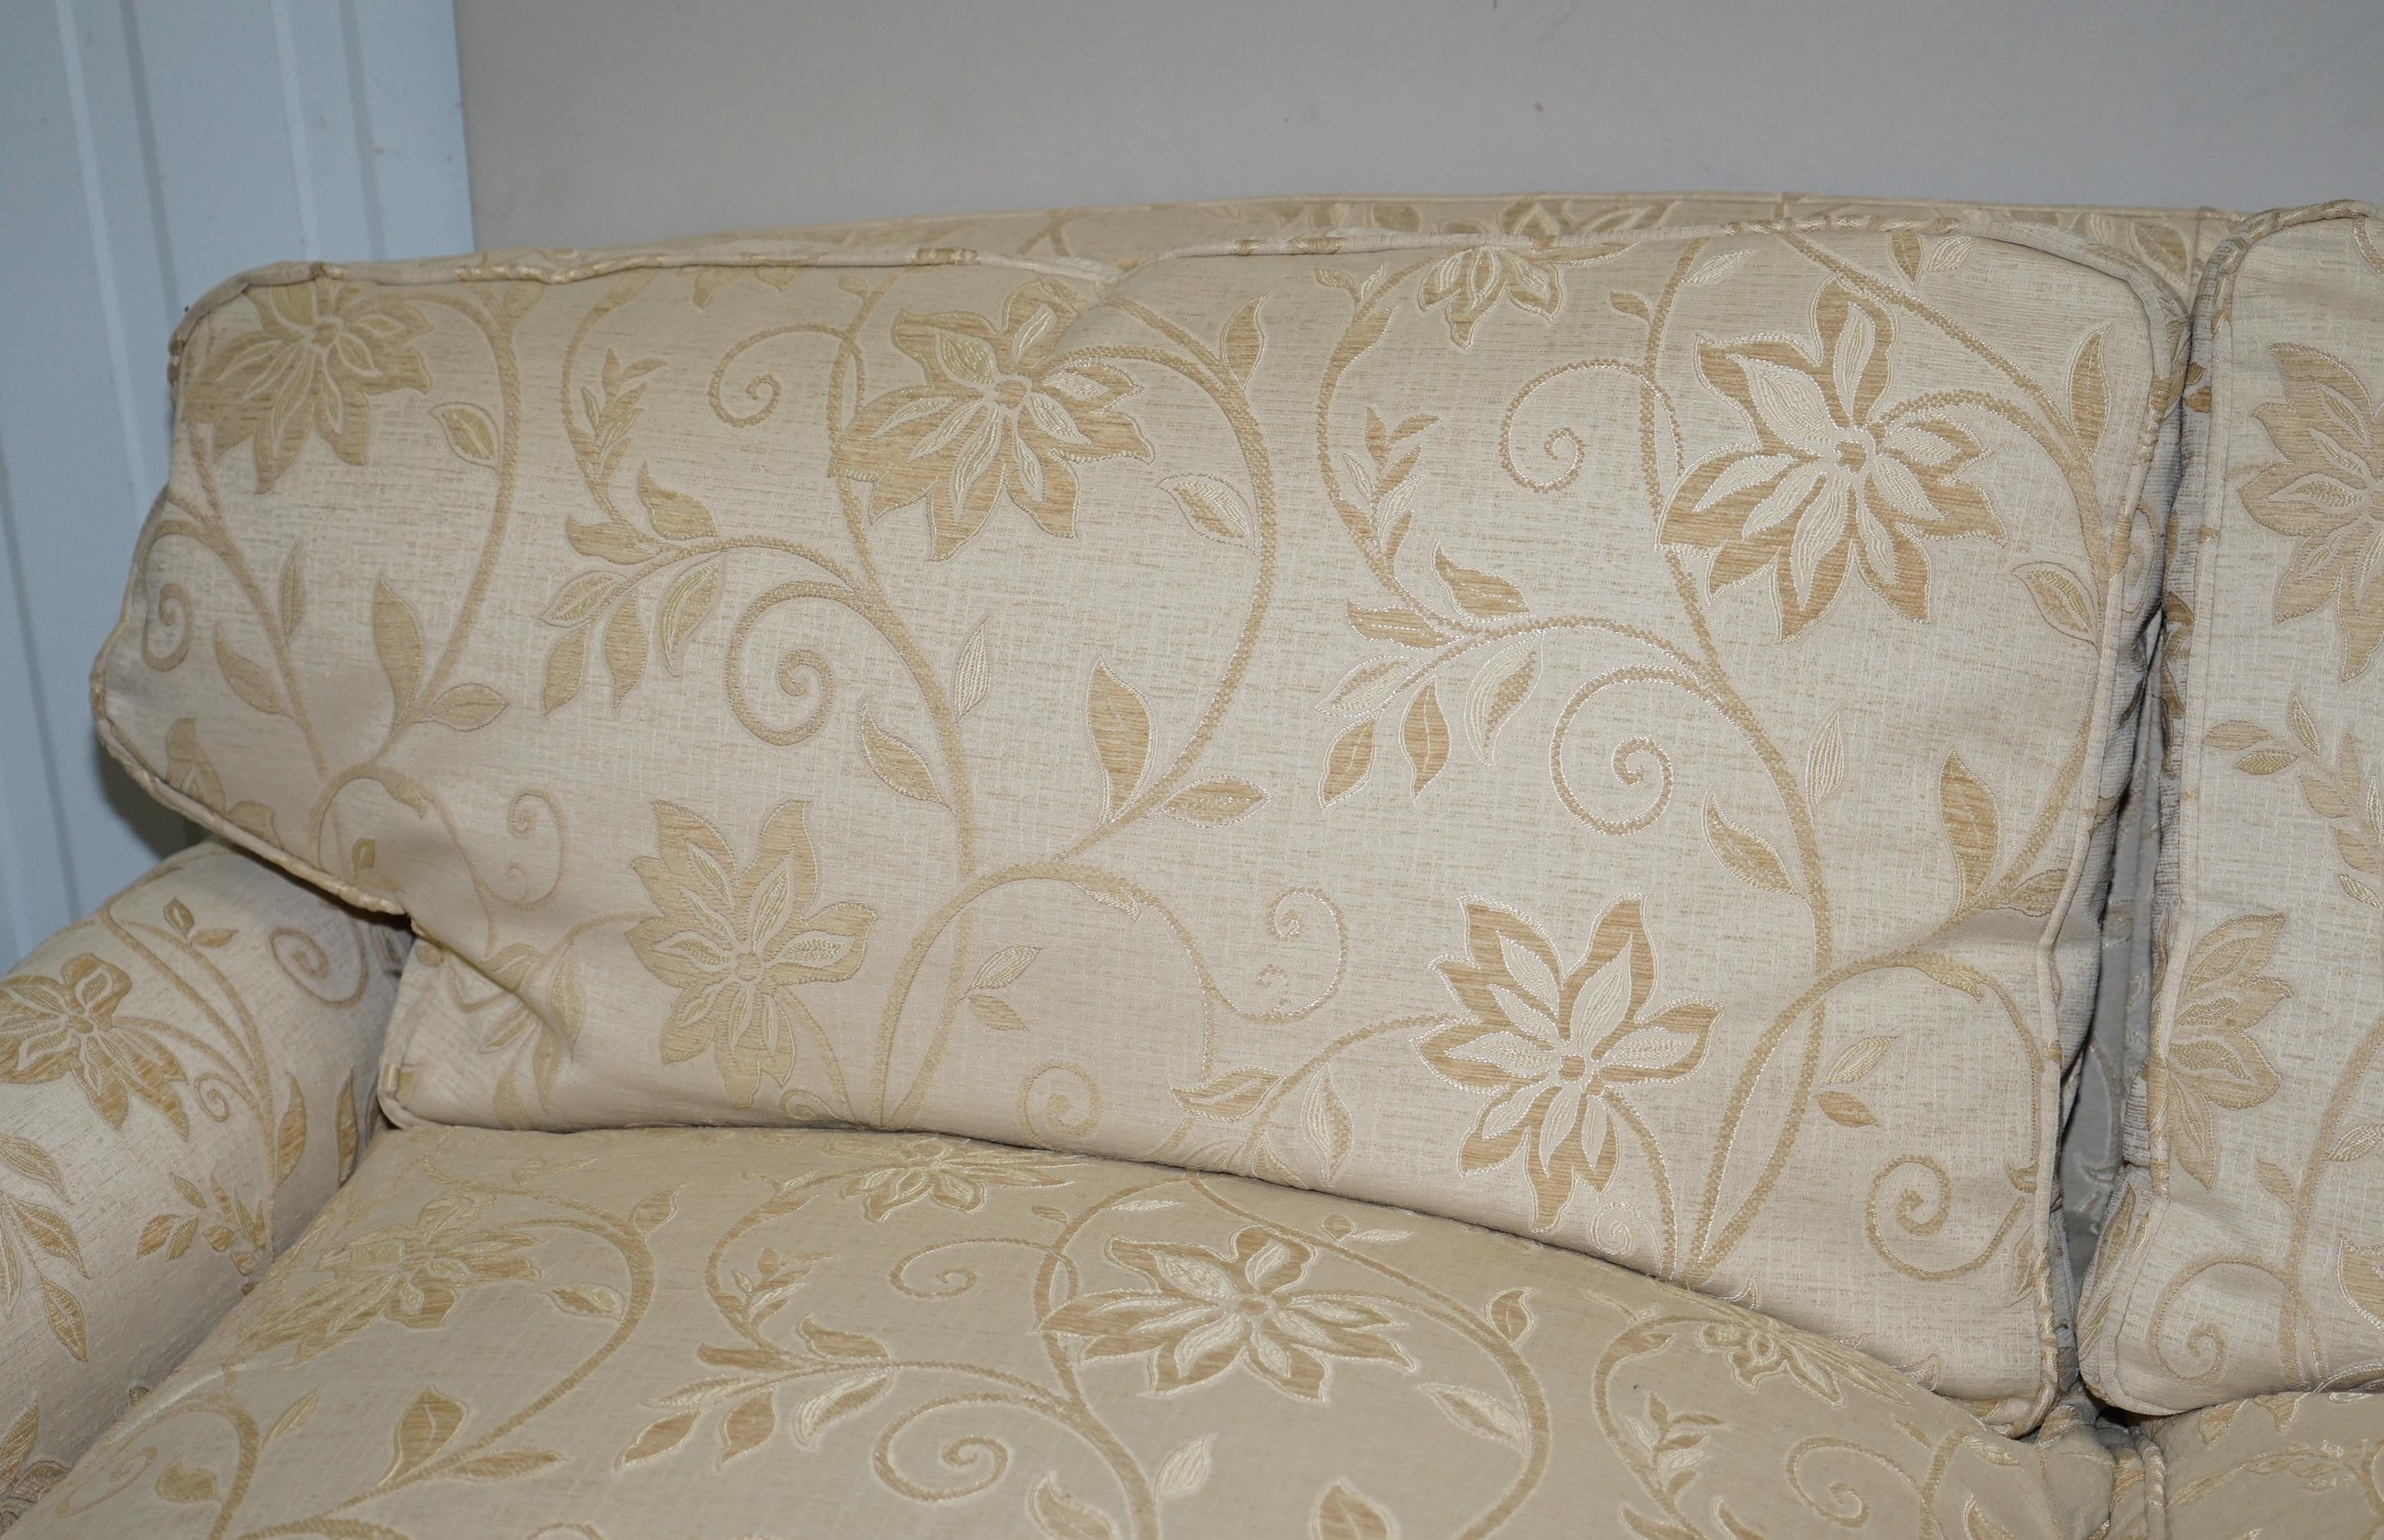 Hand-Crafted Victorian Howard & Sons Sofa with Feather Filled Cushions and Removable Covers